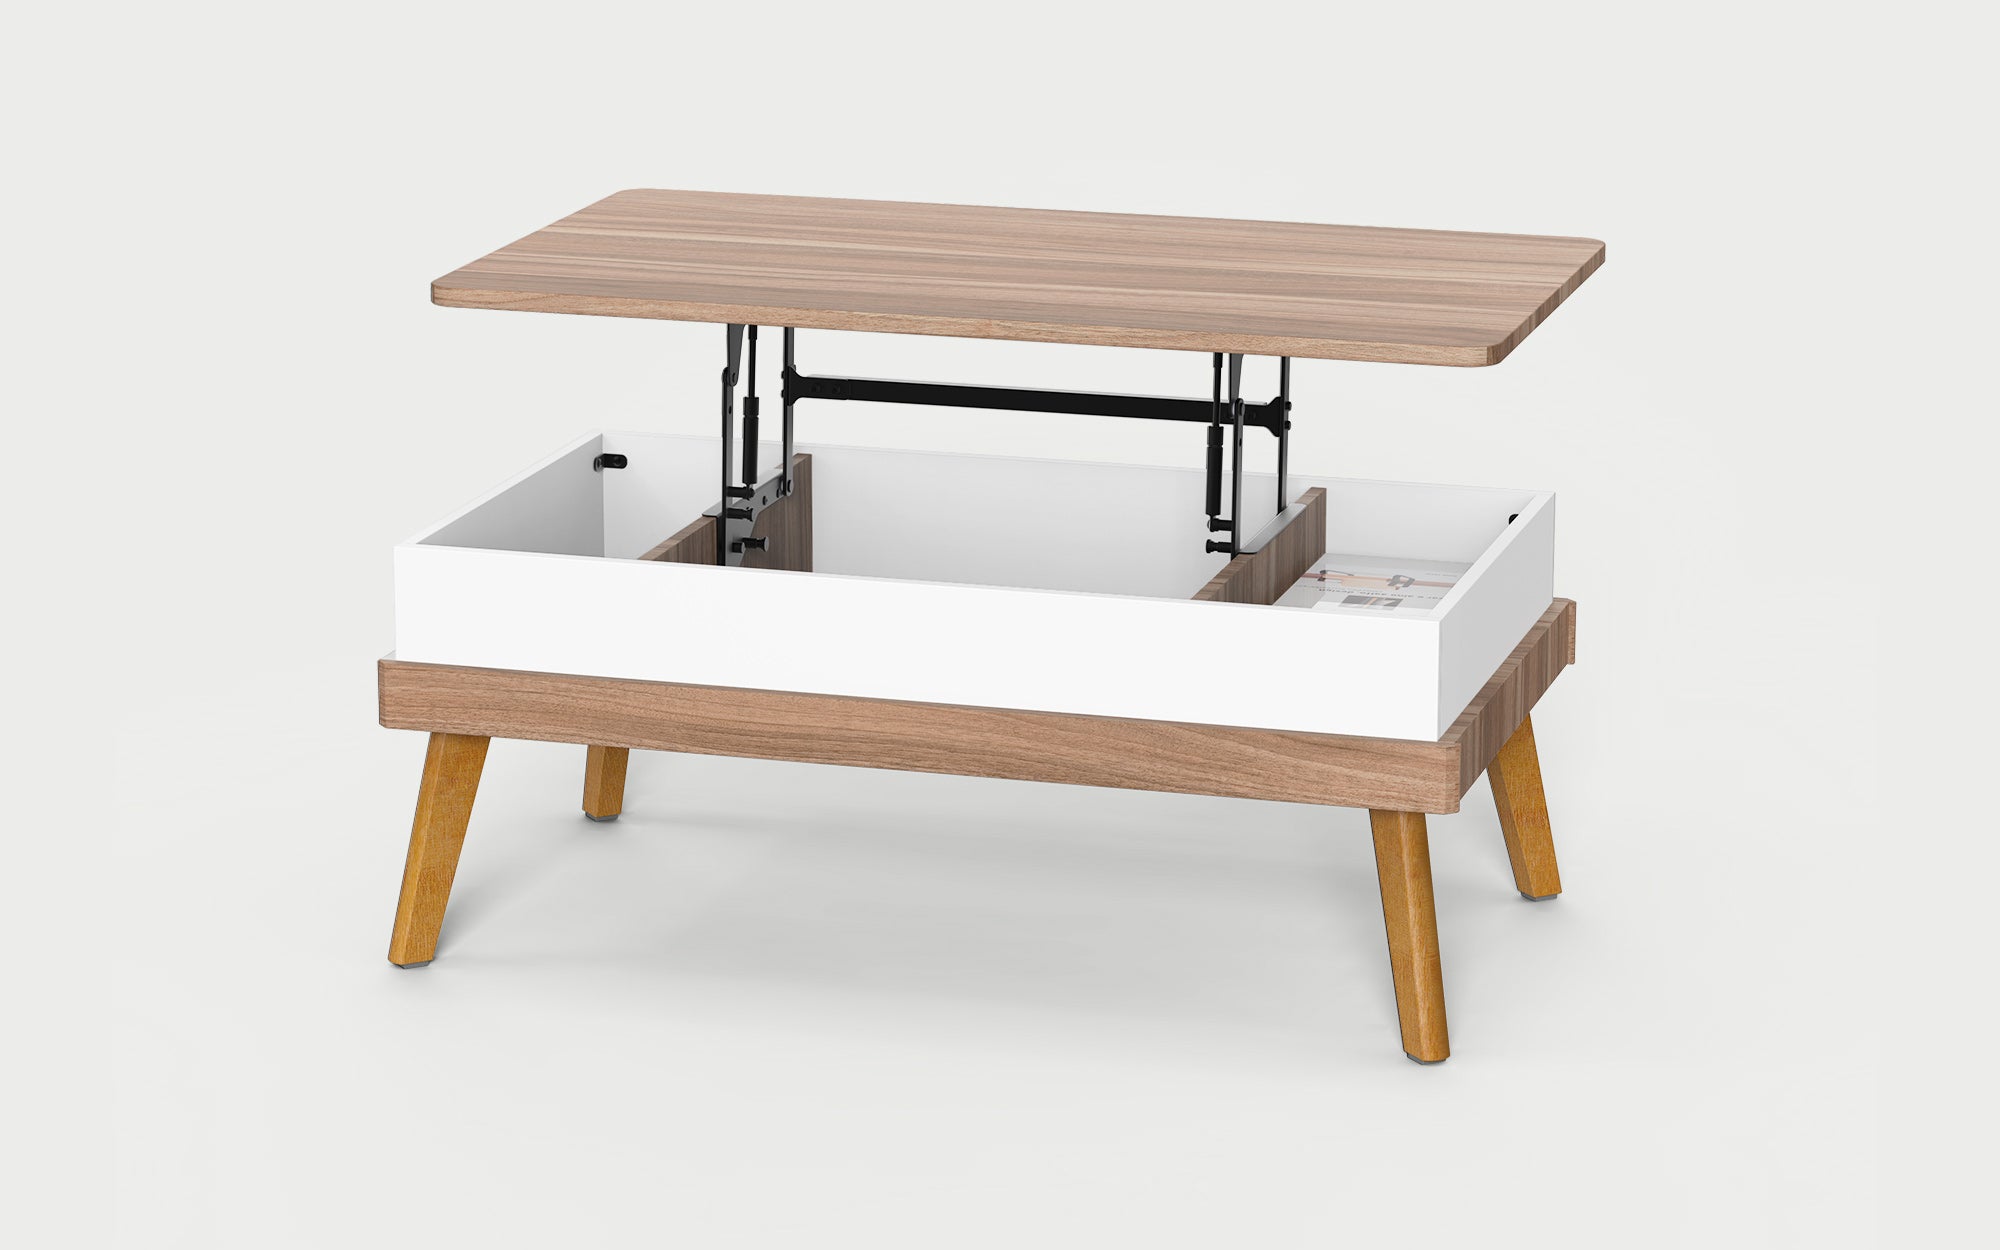 Lift Top Coffee Table, Modern Lift Tabletop Center Table